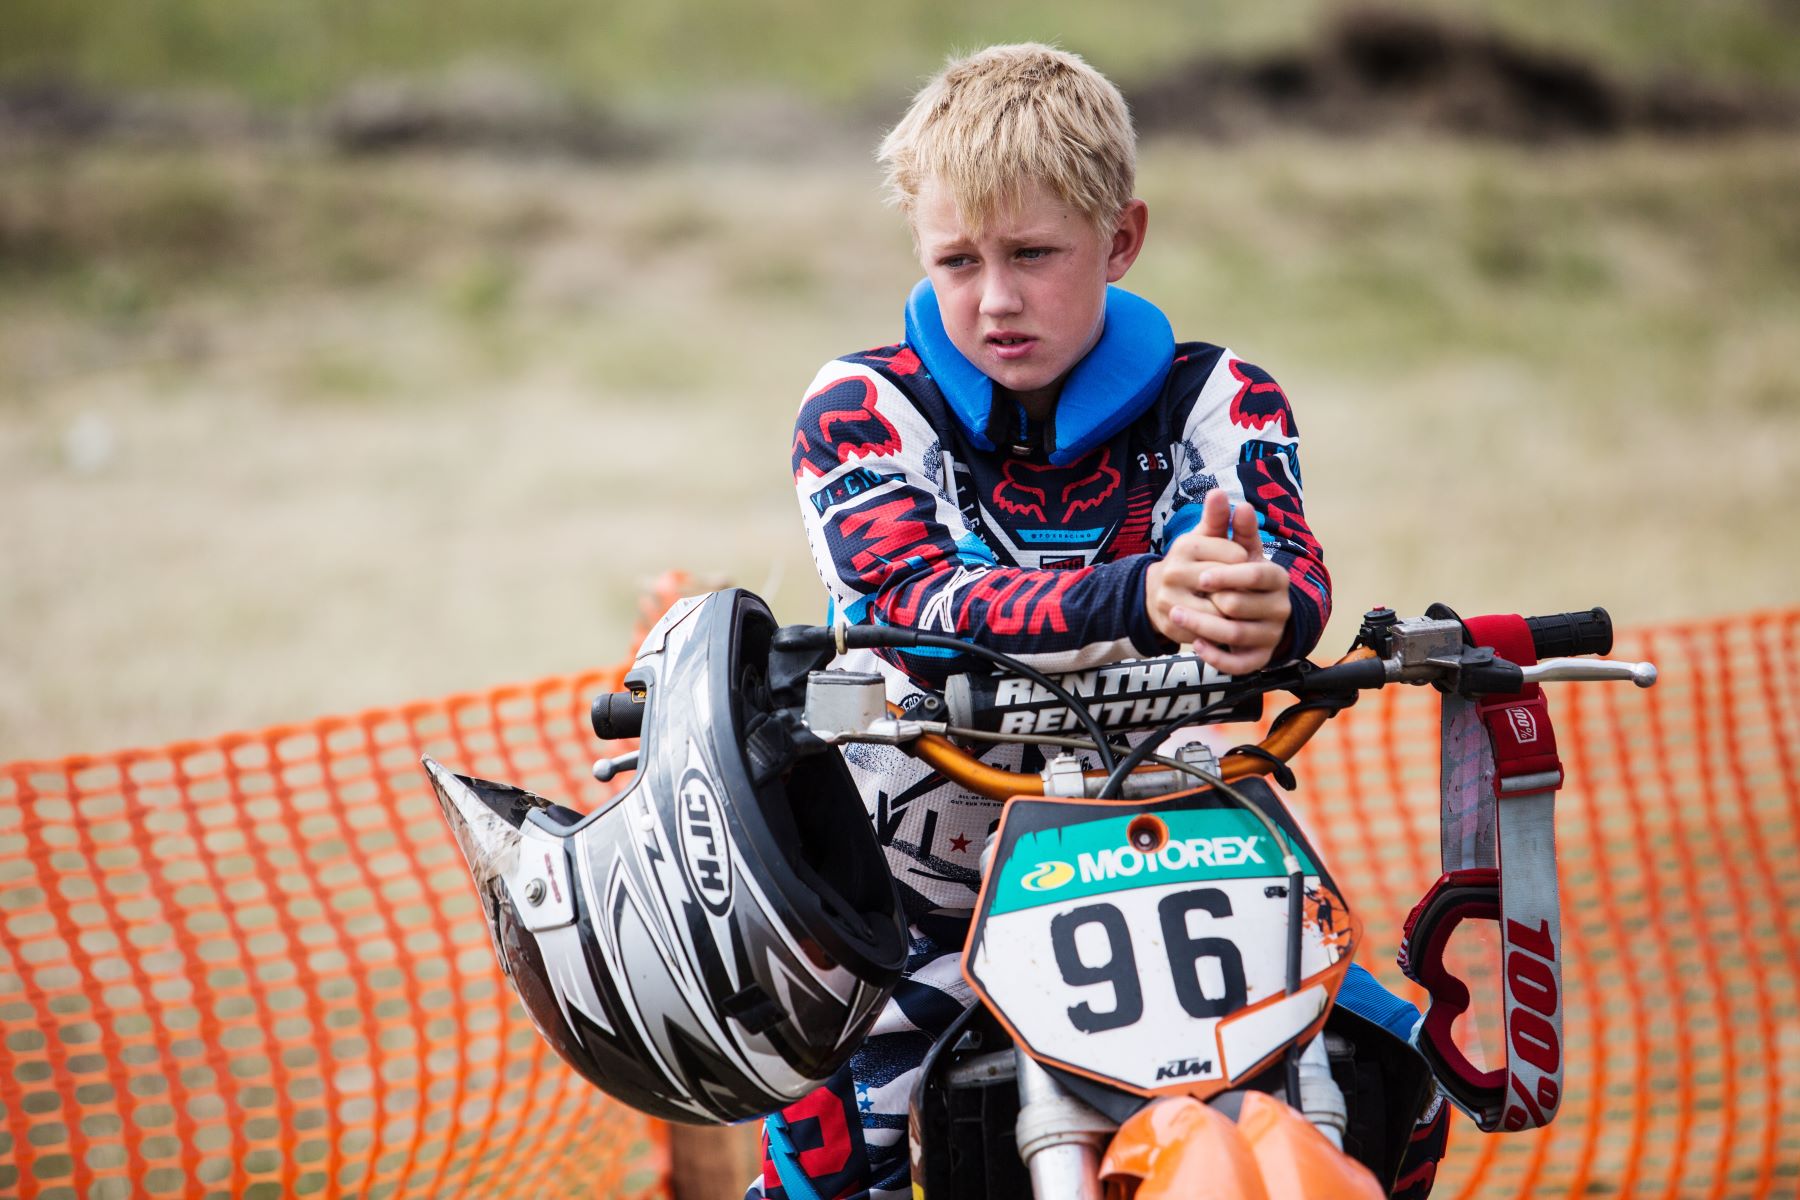 A child sitting on a dirt bike motorcycle during a motocross championship in Tavricheskoye of the Omsk Region in Russia